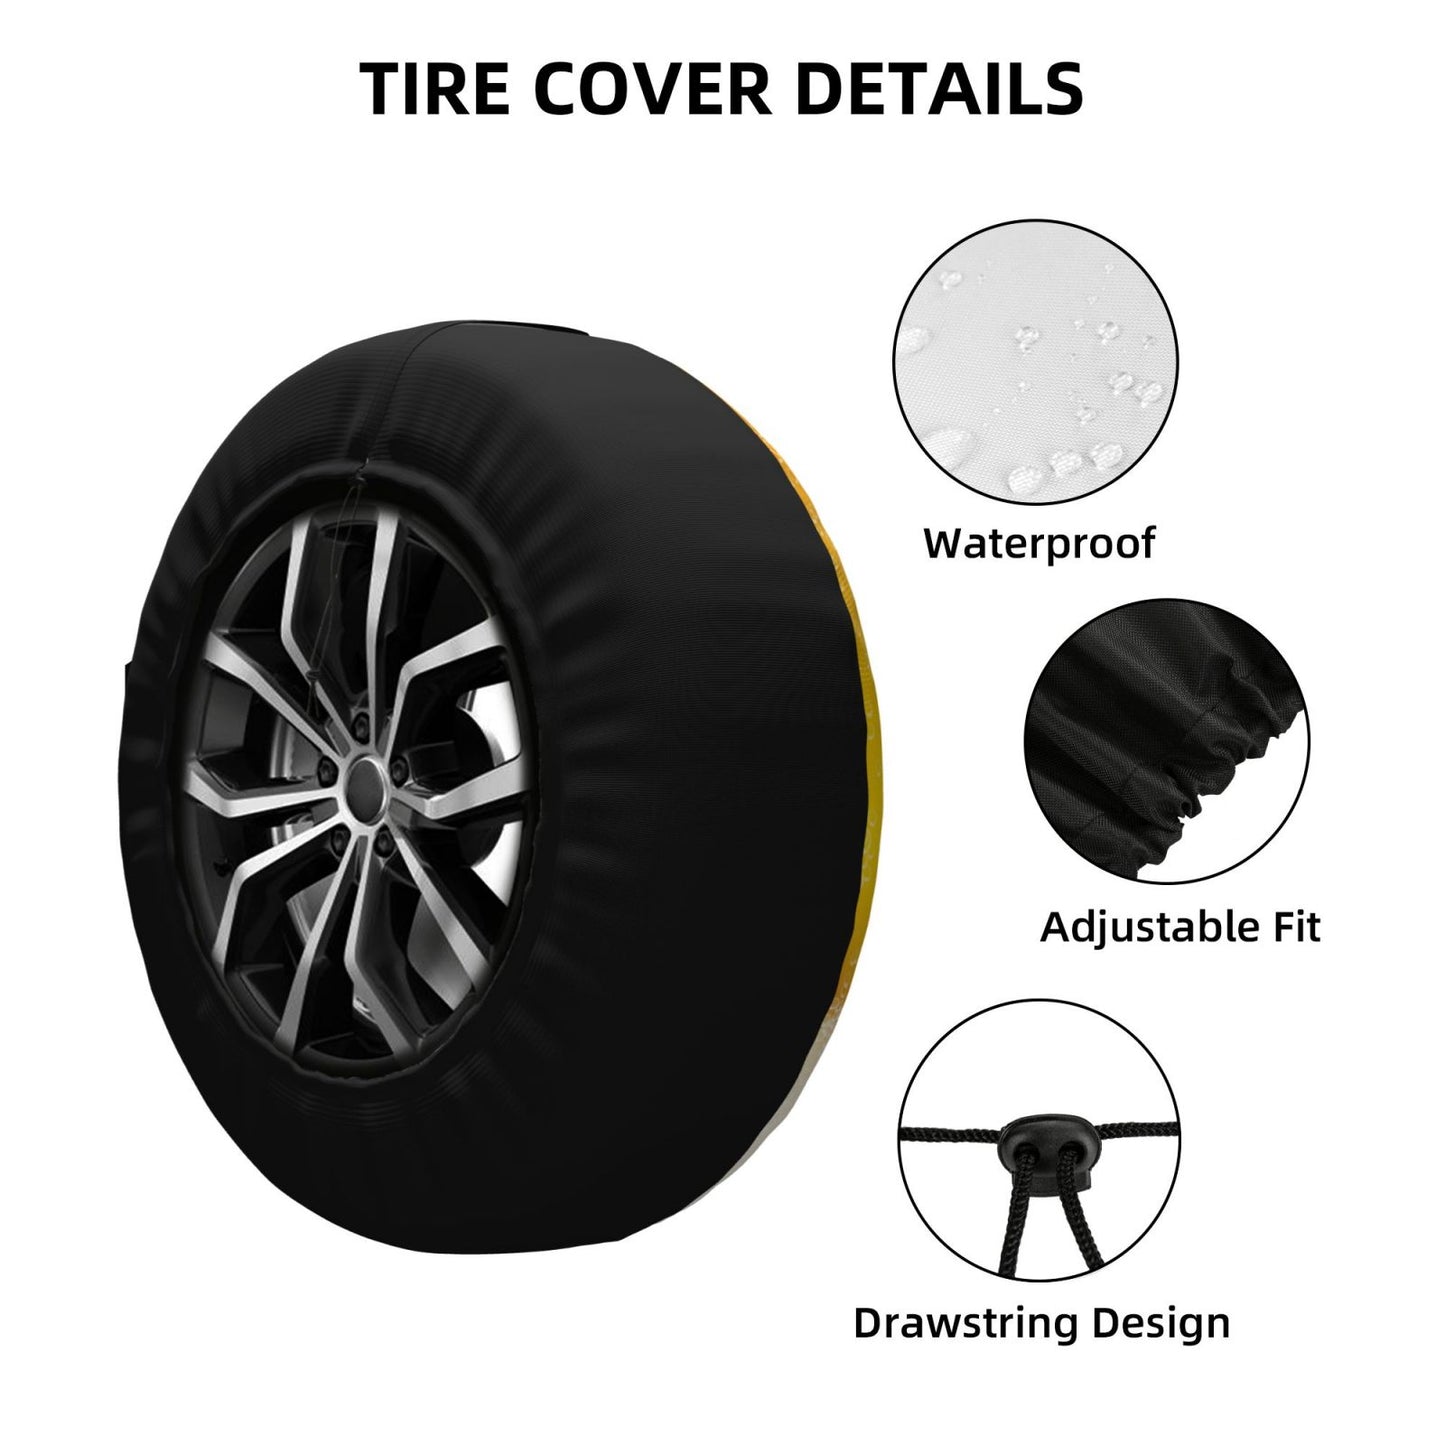 YongColer Tires Cover - Universal Spare Tire Covers for RVs, Trailers, Trucks, Camper, SUV, Car